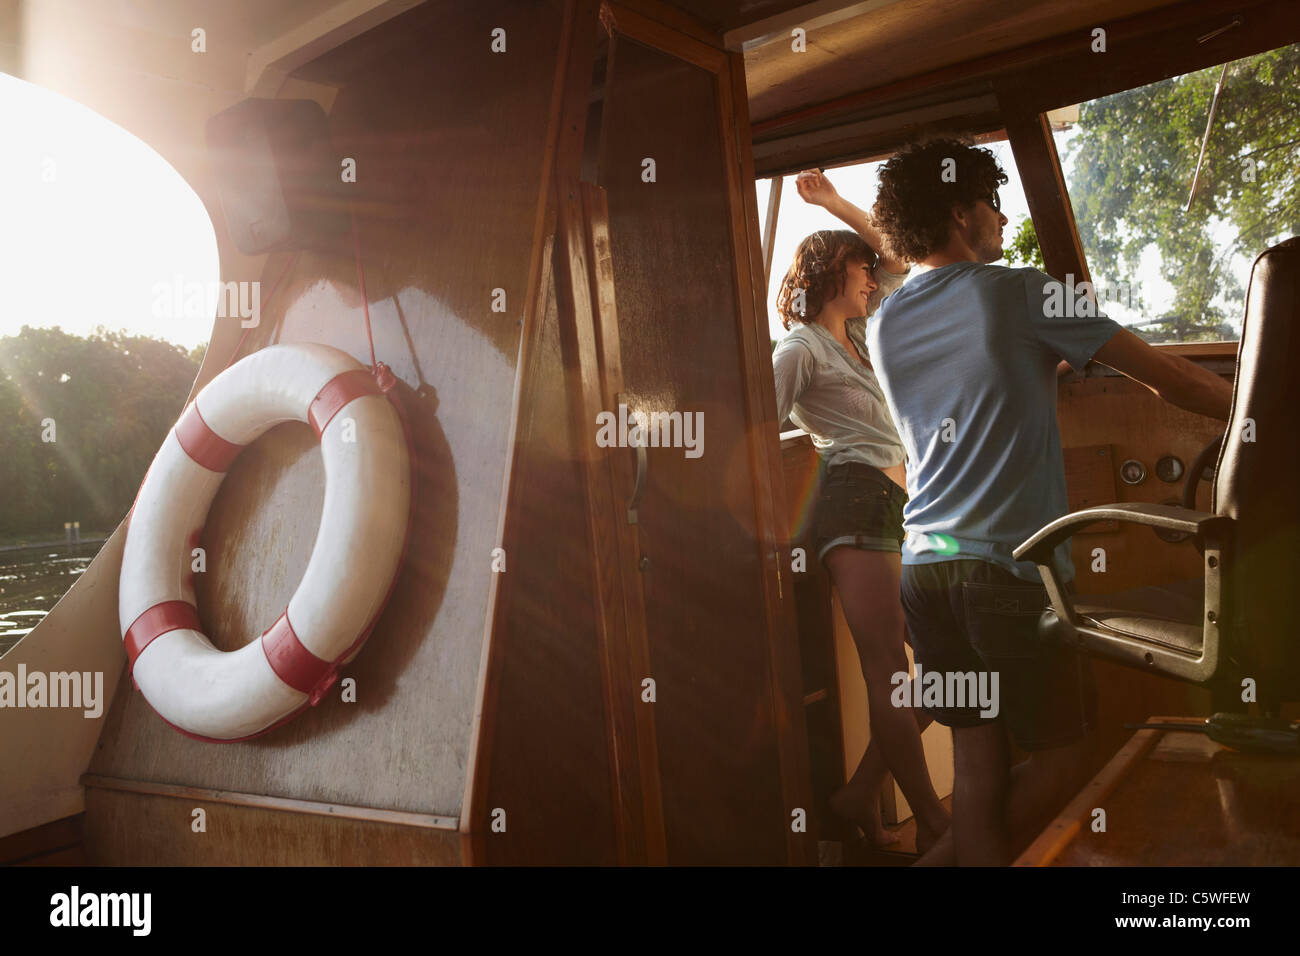 Germany, Berlin, Young couple in boat cabin Stock Photo